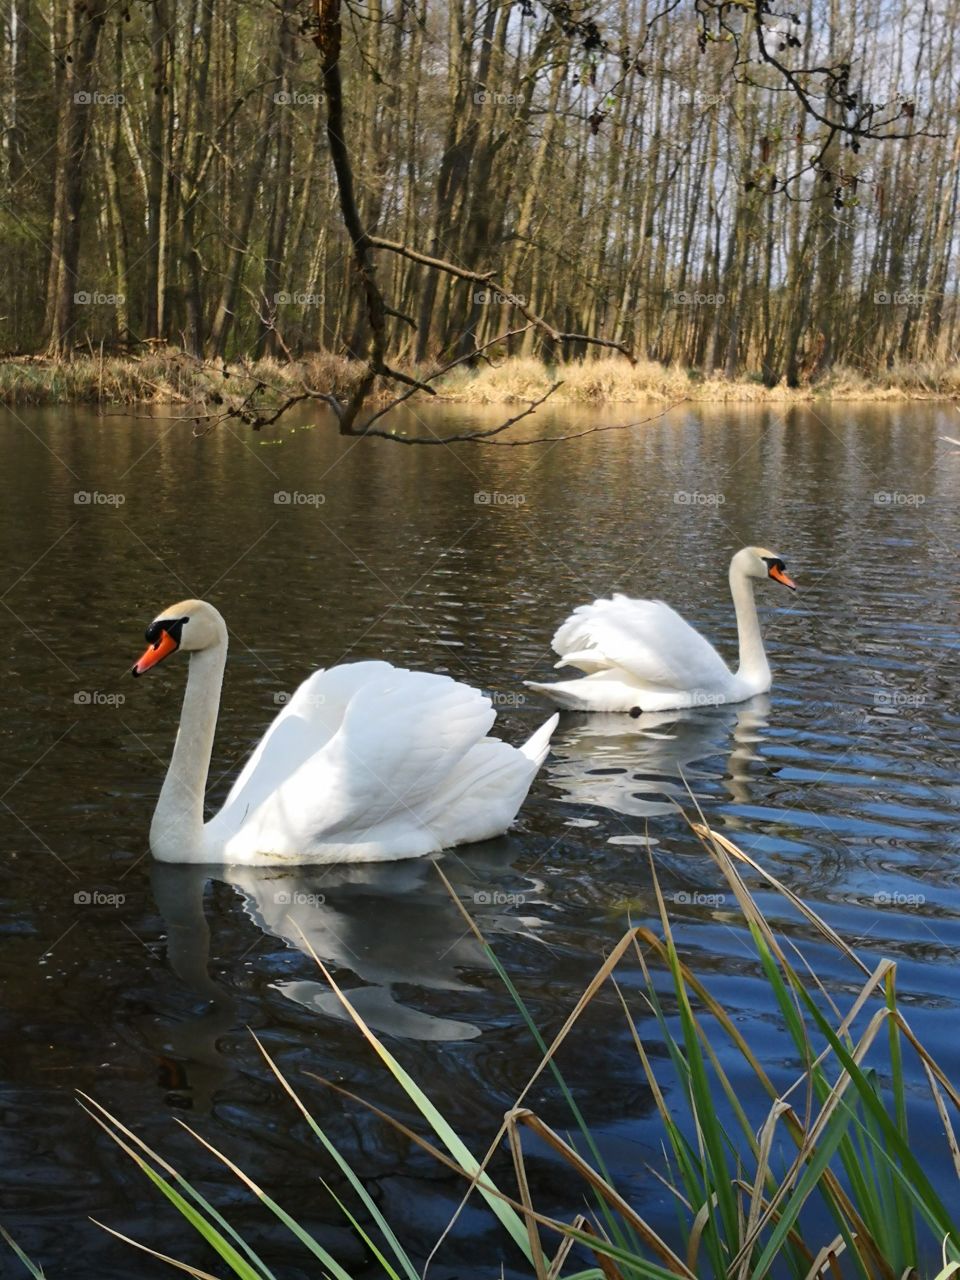 A pair of white swans. West Poland.